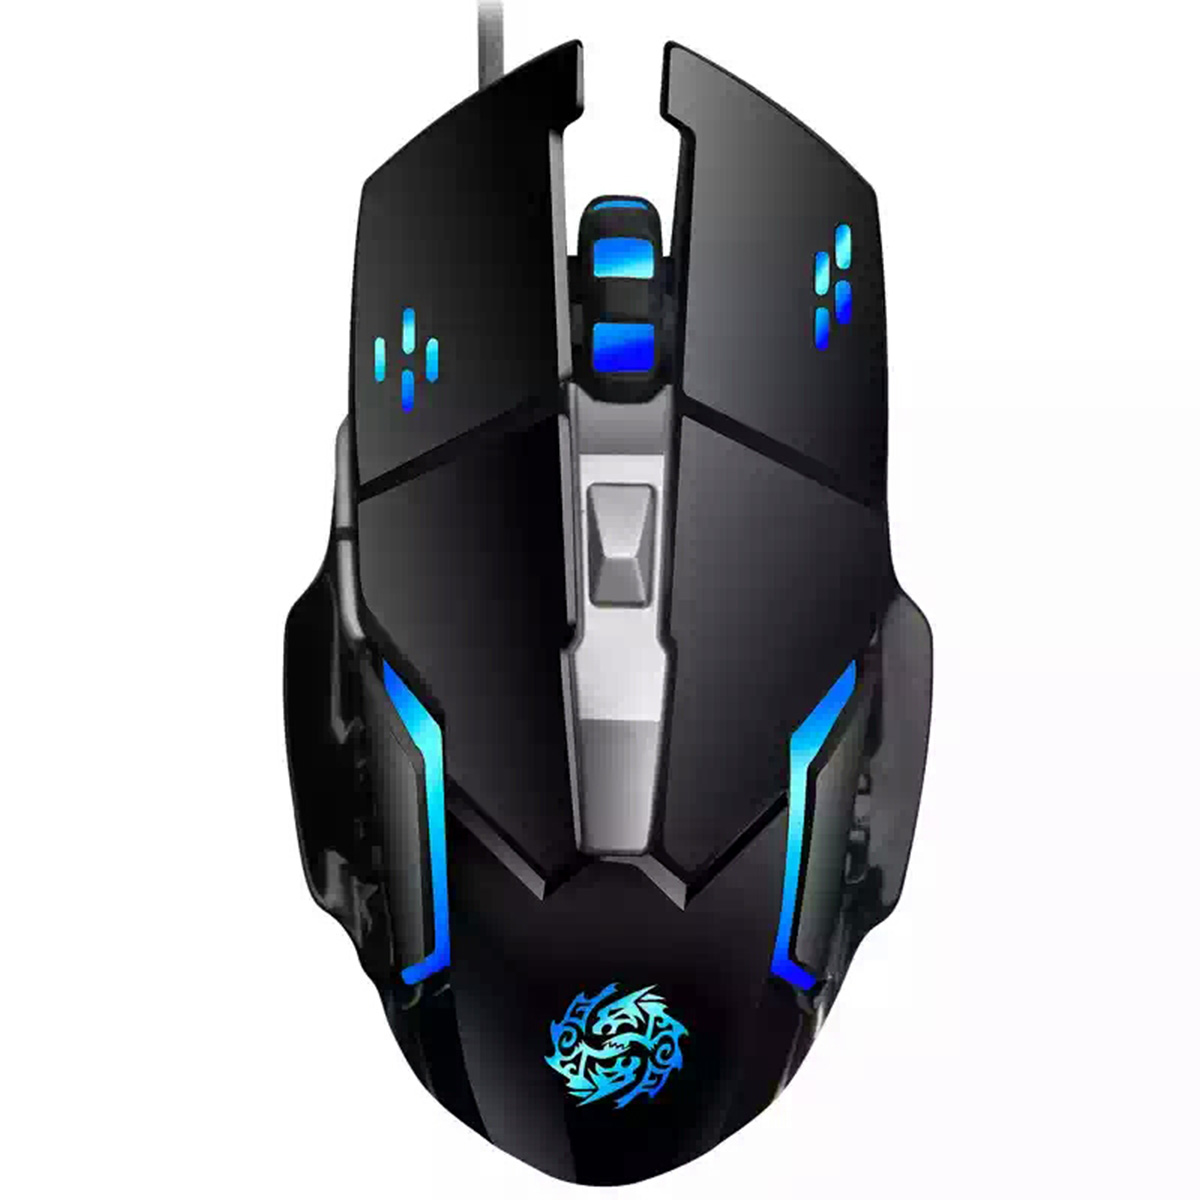 

6 Buttons 2400DPI Adjustable USB Wired Optical Gaming Mouse for Desktop PC Laptops